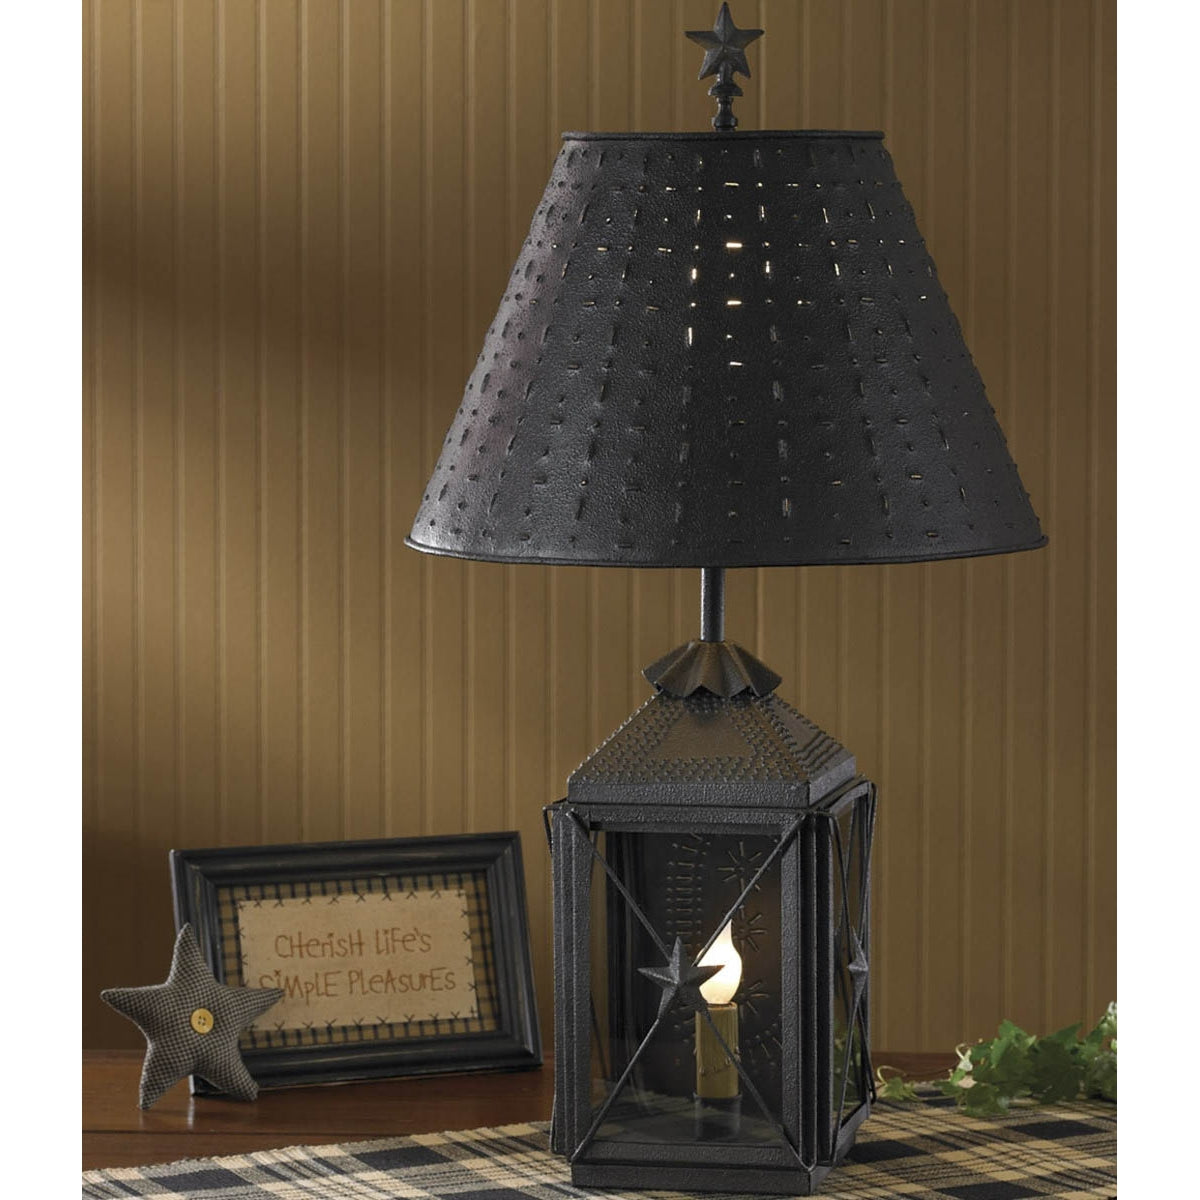 Park Designs Colonial Blackstone Lamp with Night Light - Unique Collectibles 4 YOU